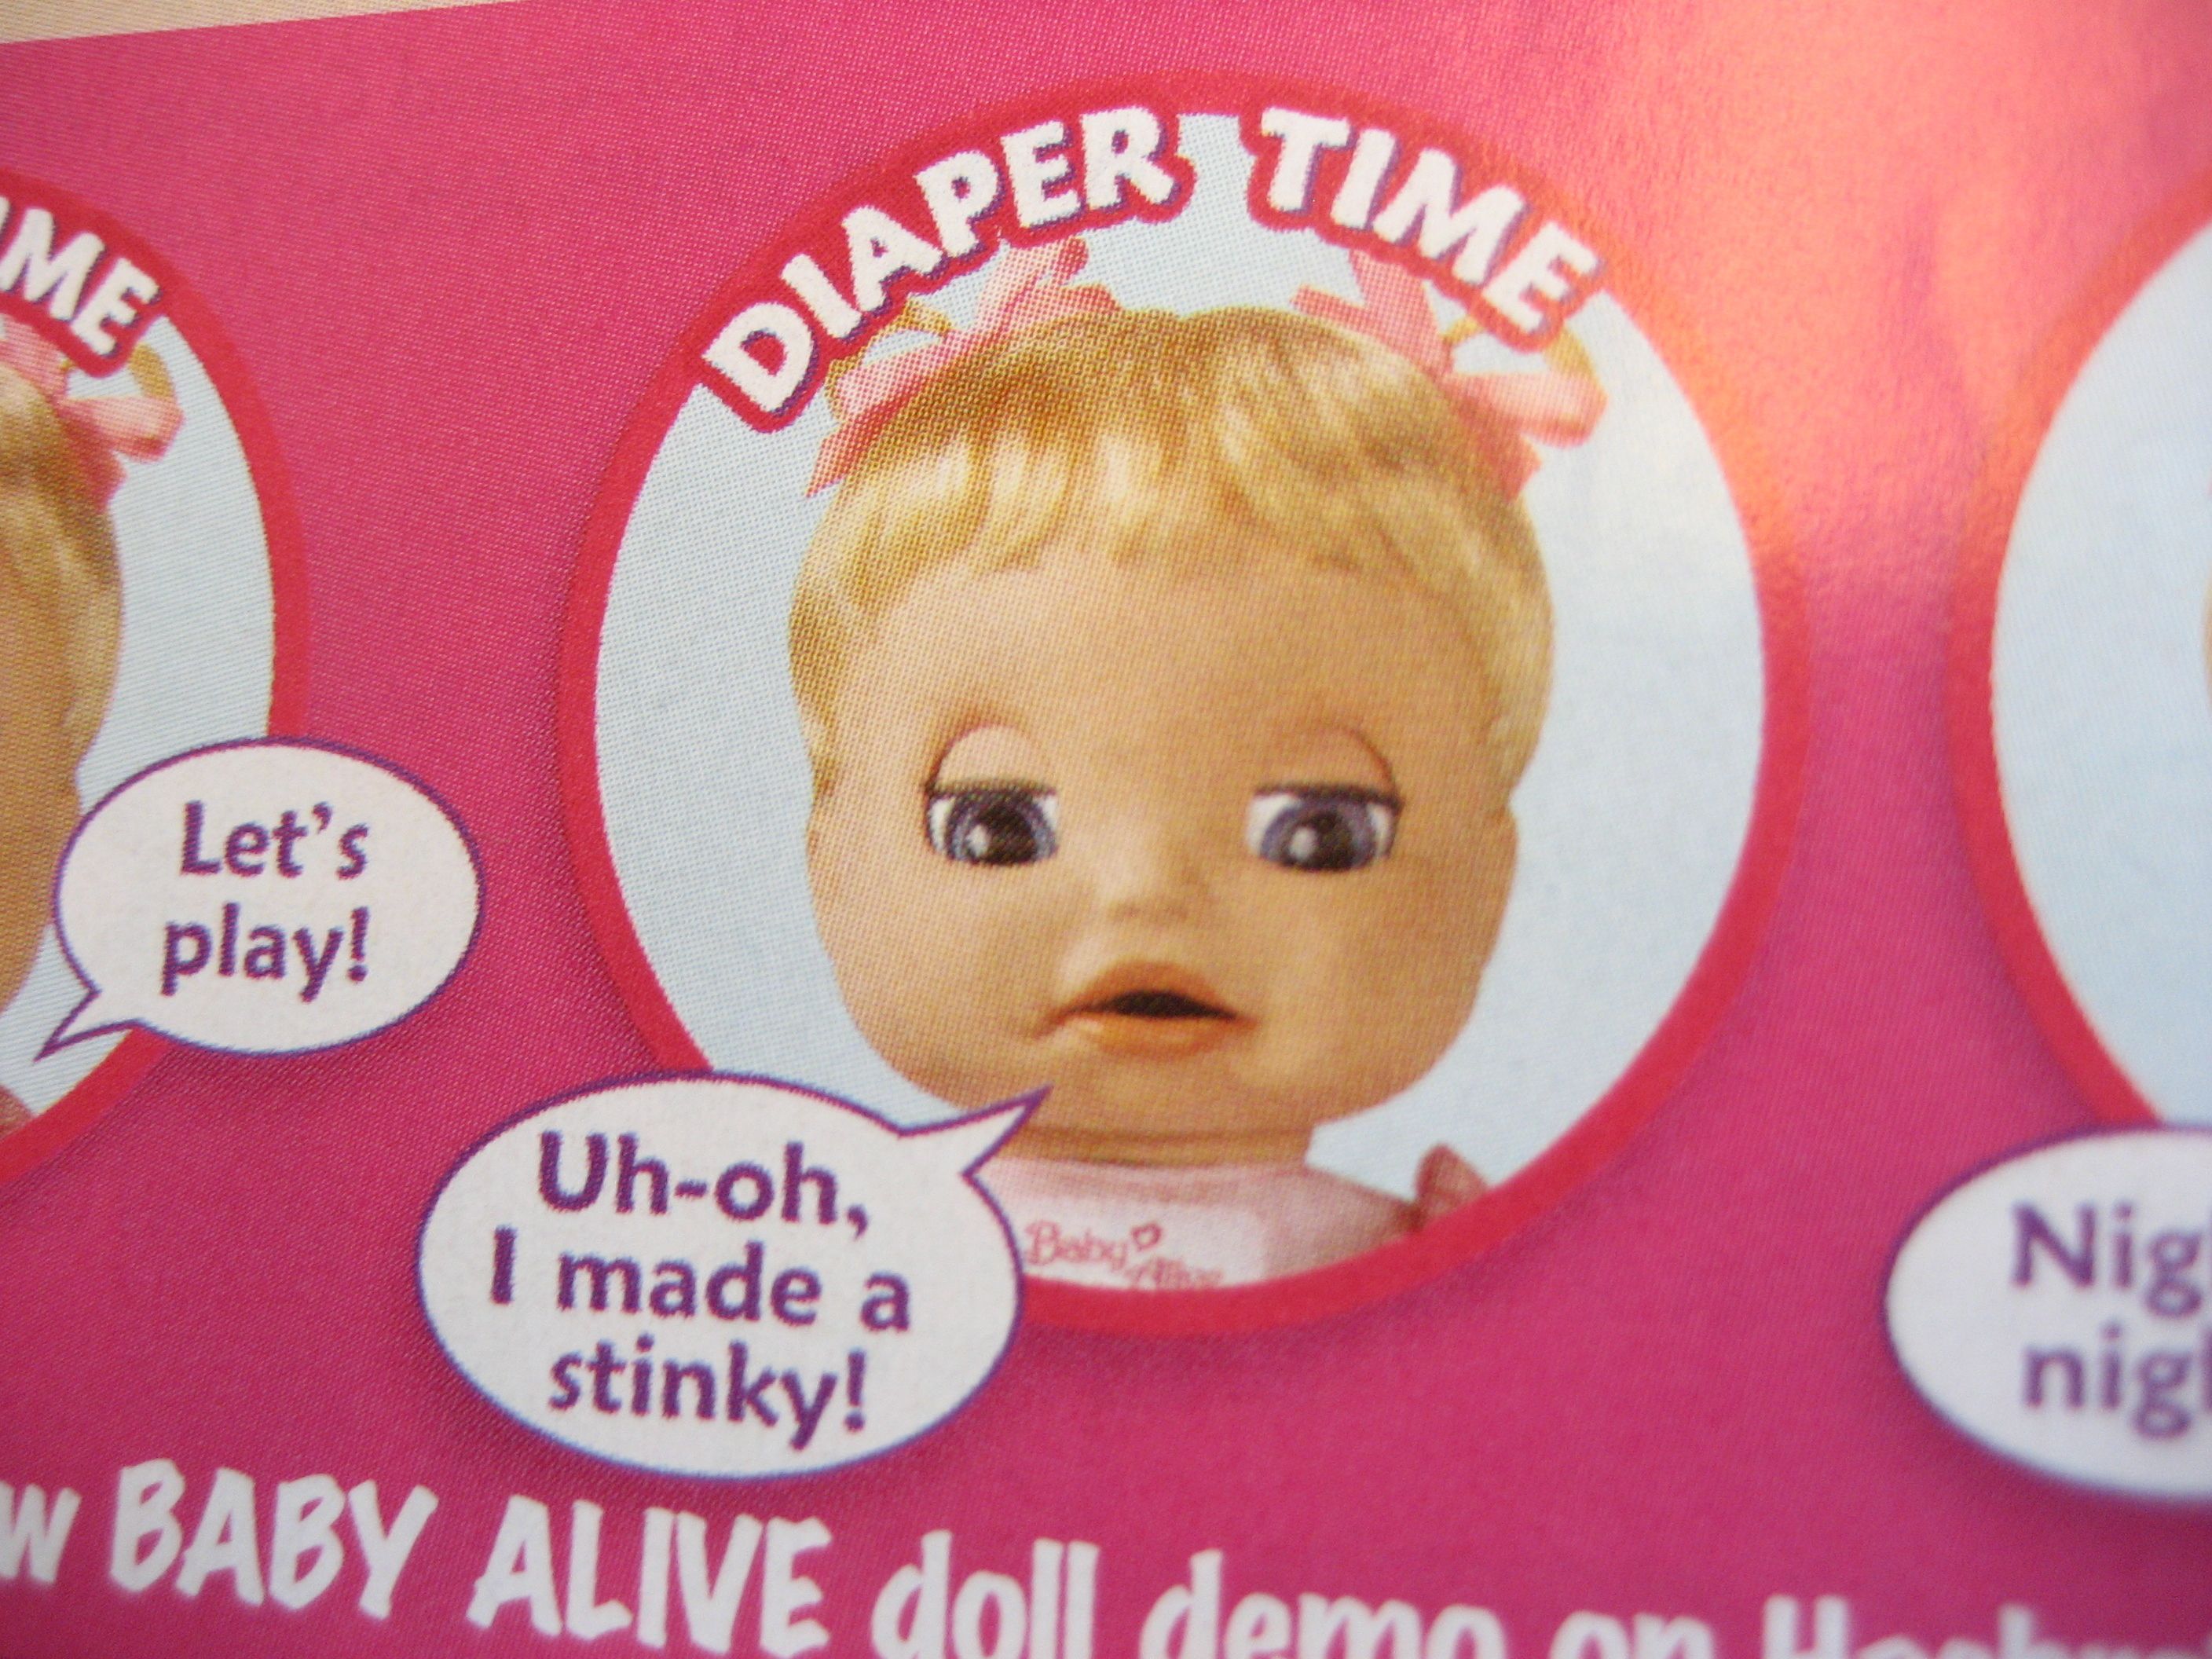 baby alive doll from the 70's